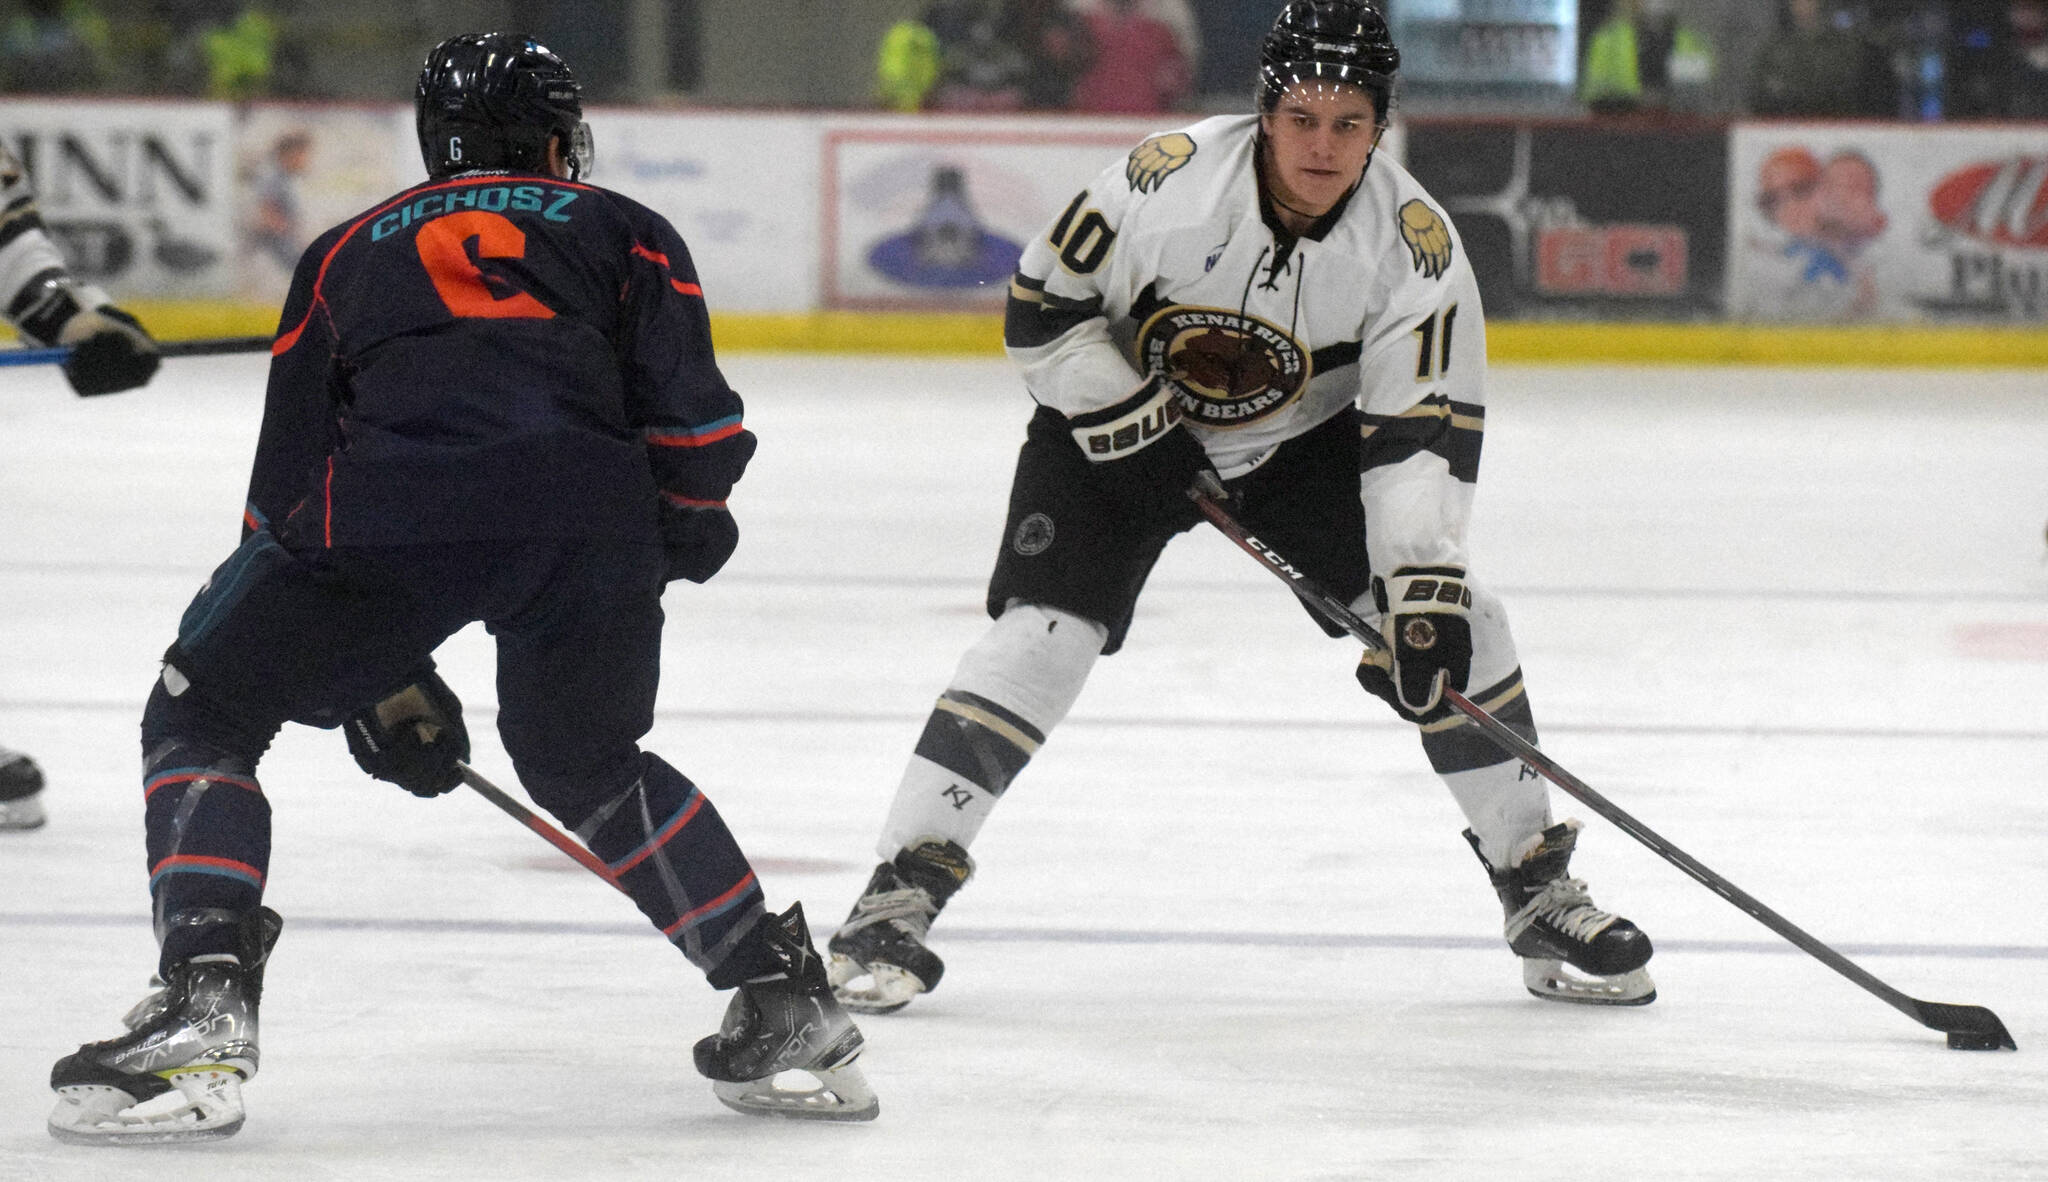 Kenai River Brown Bears forward Caden Triggs carries the puck against Anchorage Wolverines defenseman Campbell Cichosz on Friday, Nov. 5, 2021, at the Soldotna Regional Sports Complex in Soldotna, Alaska. (Photo by Jeff Helminiak/Peninsula Clarion)